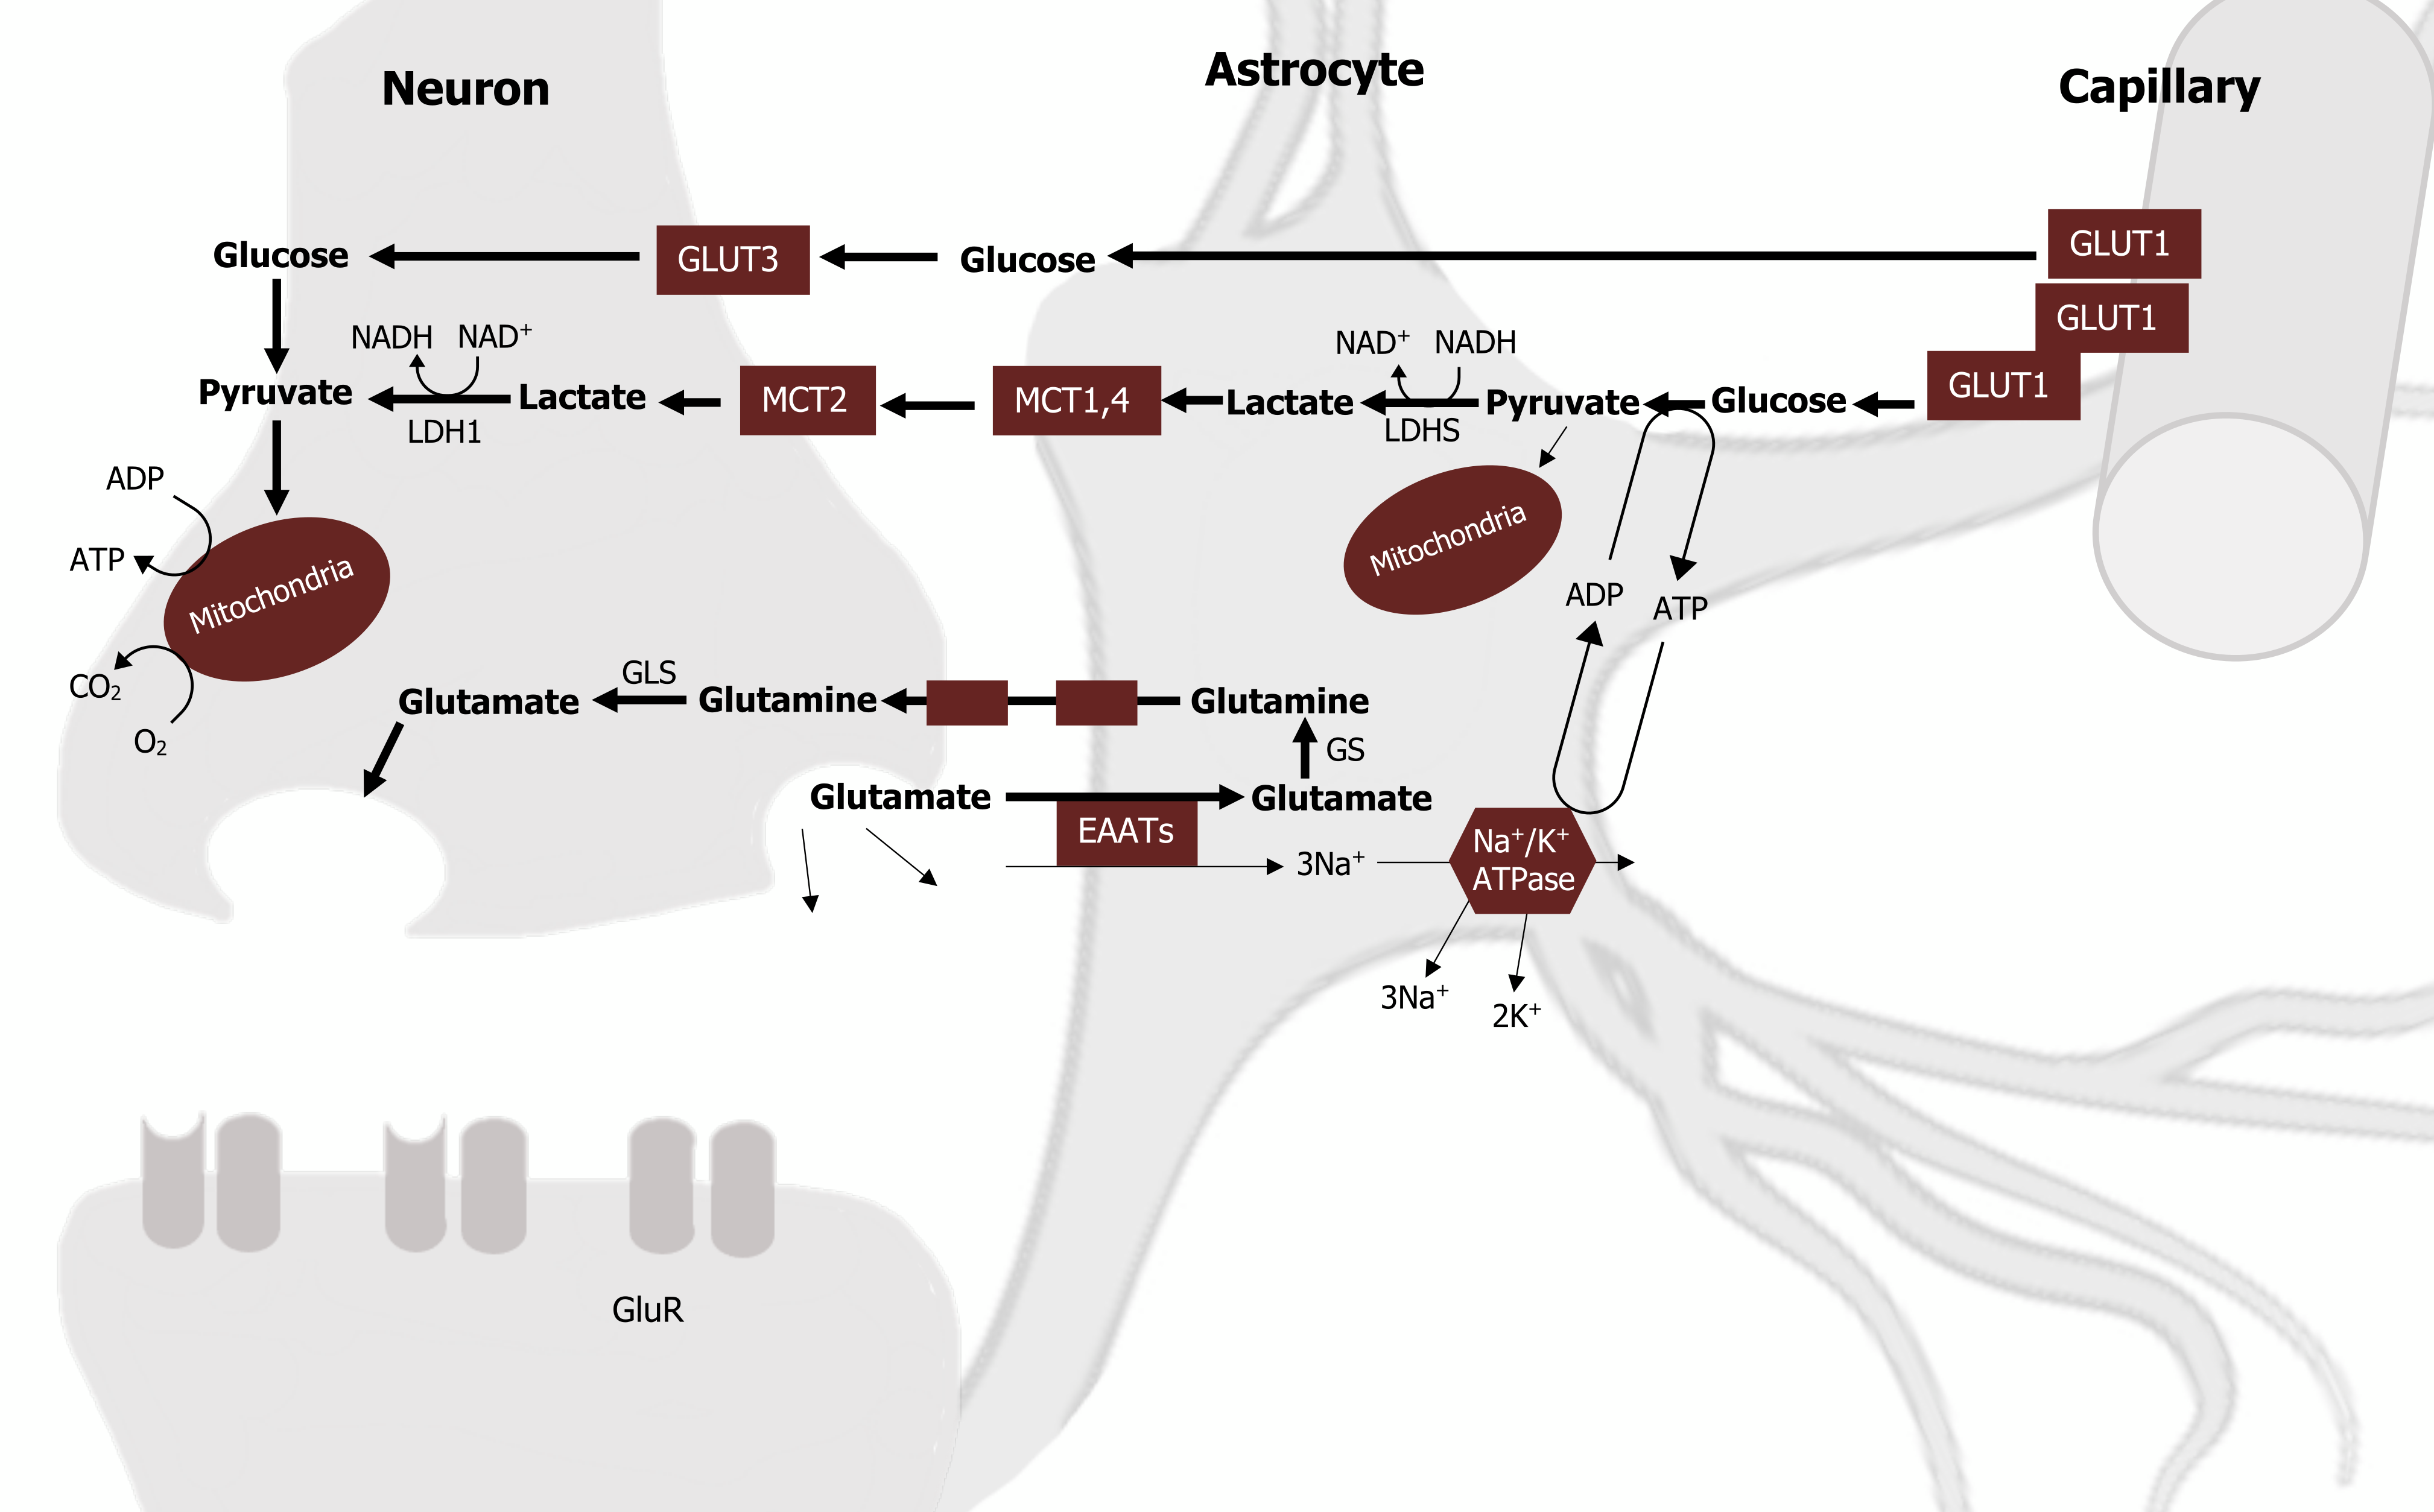 GLUT1 in the capillary arrow glucose in the astrocyte arrow GLUT3 in the neuron arrow Glucose arrow pyruvate arrow mitochondria with ADP arrow ATP and O2 arrow CO2. GLUT1 in the capillary arrow glucose arrow pyruvate in the astrocyte arrow with LDHS and NADH arrow NAD+ to lactate arrow MCT1,4 arrow MCT2 in the neuron arrow lactate arrow with LDH1 and NAD+ arrow NADH to pyruvate. Glutamate in the neuron arrow with EAATs to Glutamate in the astrocyte arrow with GS to glutamine arrow glutamine in the neuron arrow with GLS to glutamate arrow extracellular space. EAATs arrow 3 Na+ to Na+/K+ ATPase arrows releasing 3 Na+ and 2 K+ extracellularly. Circular arrows between ADP and ATP between Na+/K+ ATPase and arrow between glucose in the capillary to pyruvate in the astrocyte